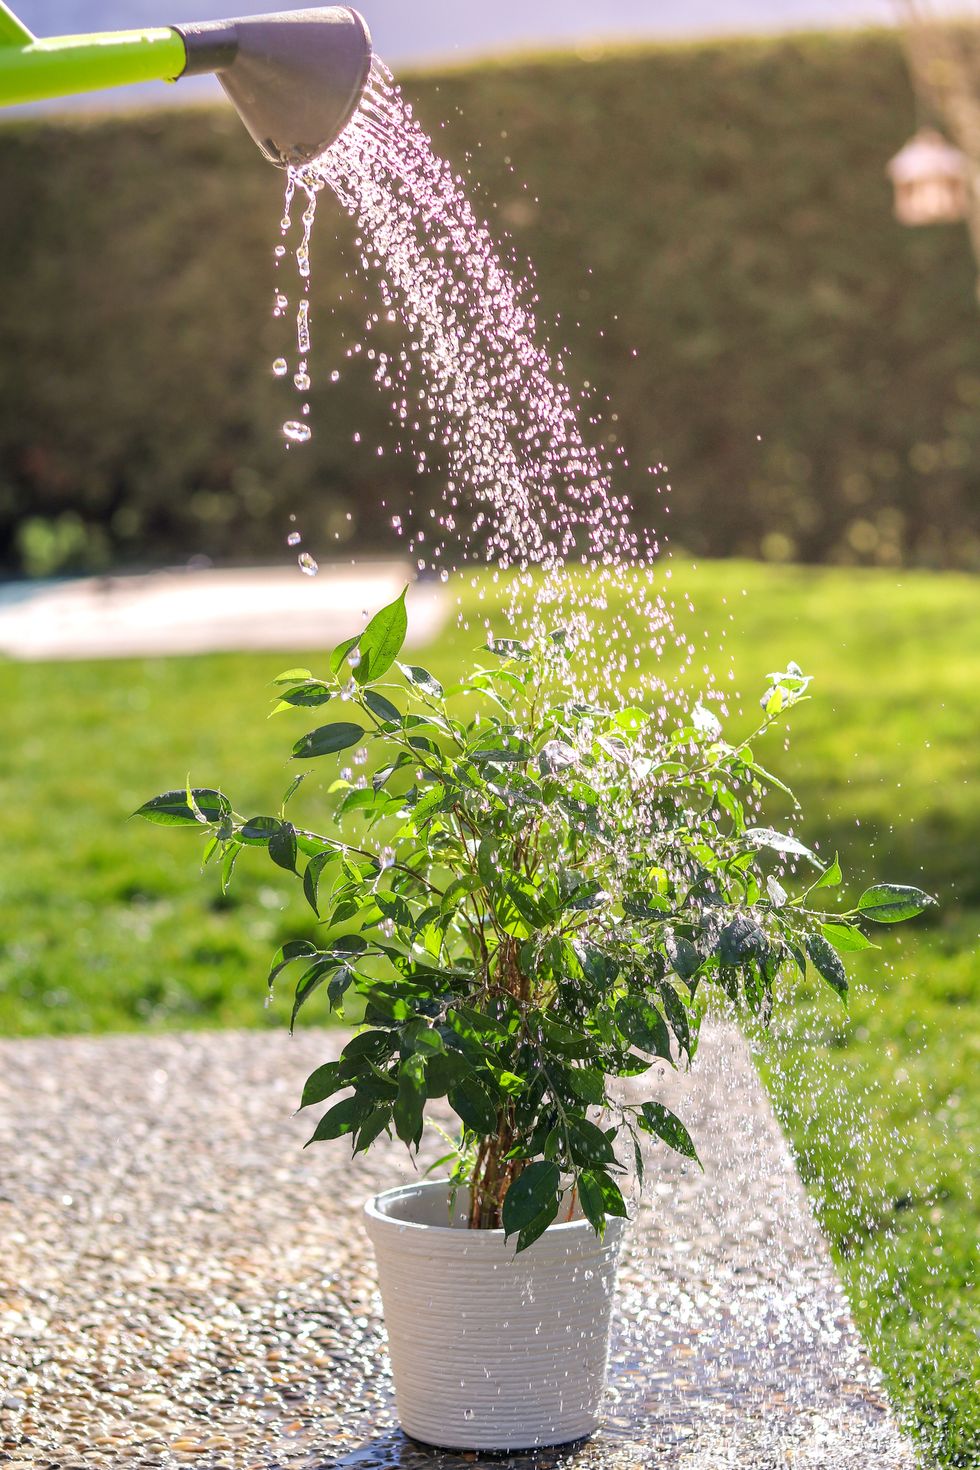 watering green flower pot in garden at bright sunny summer day from watering can small ficus benjamina bush in white pot under water drops at sunlight